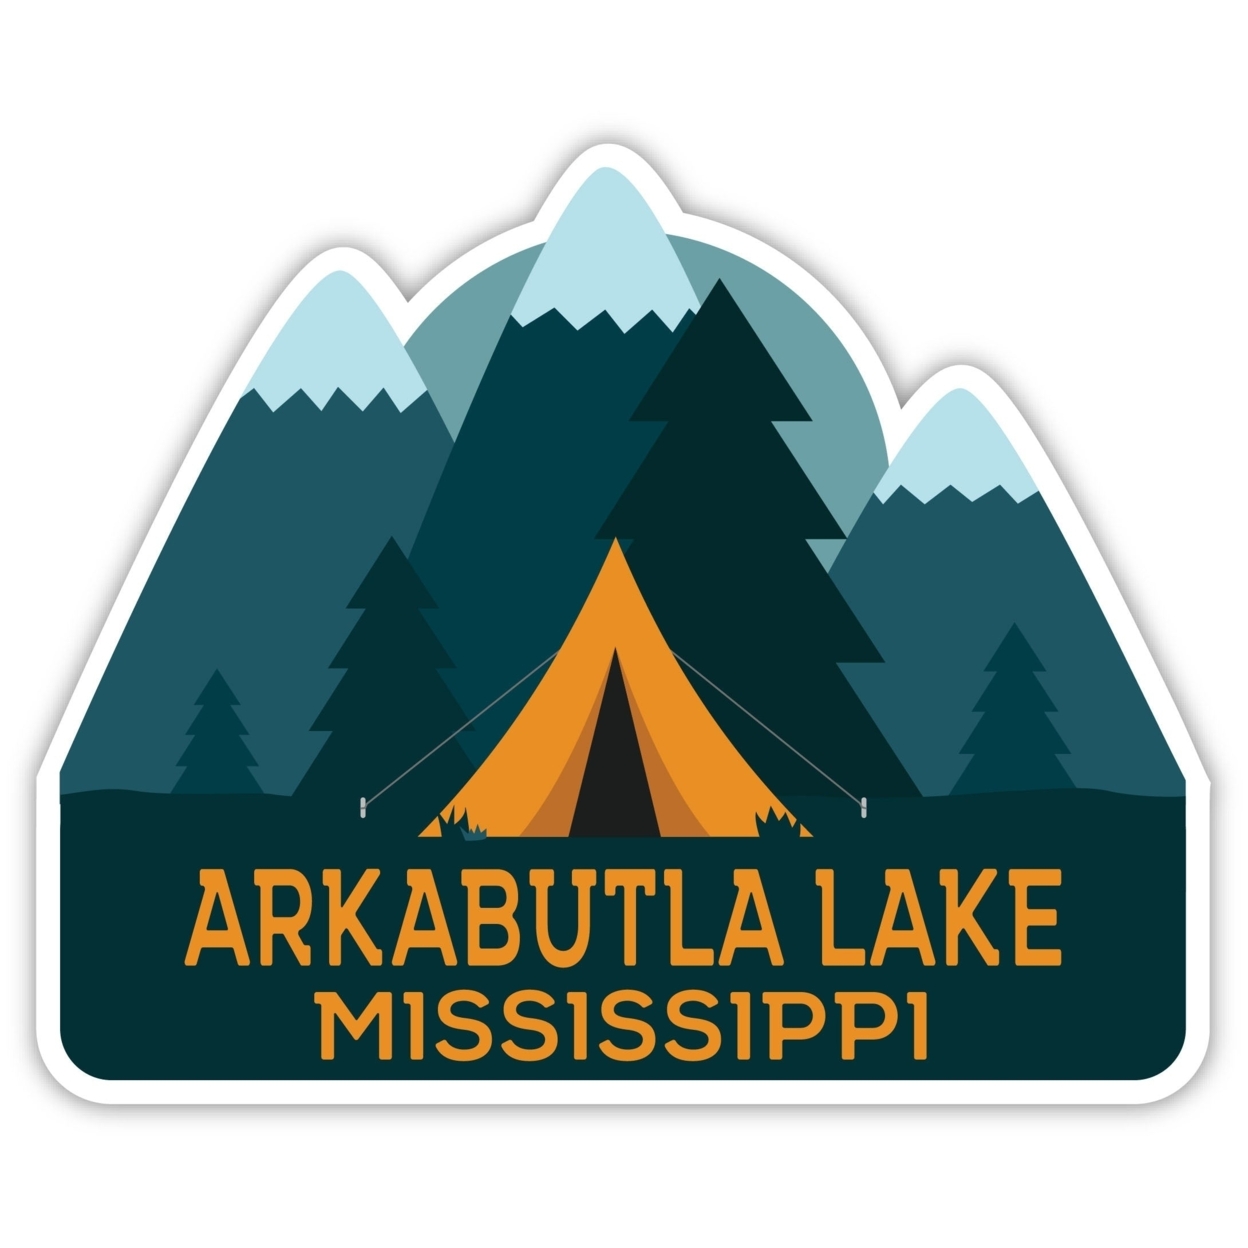 Arkabutla Lake Mississippi Souvenir Decorative Stickers (Choose Theme And Size) - 4-Pack, 2-Inch, Tent